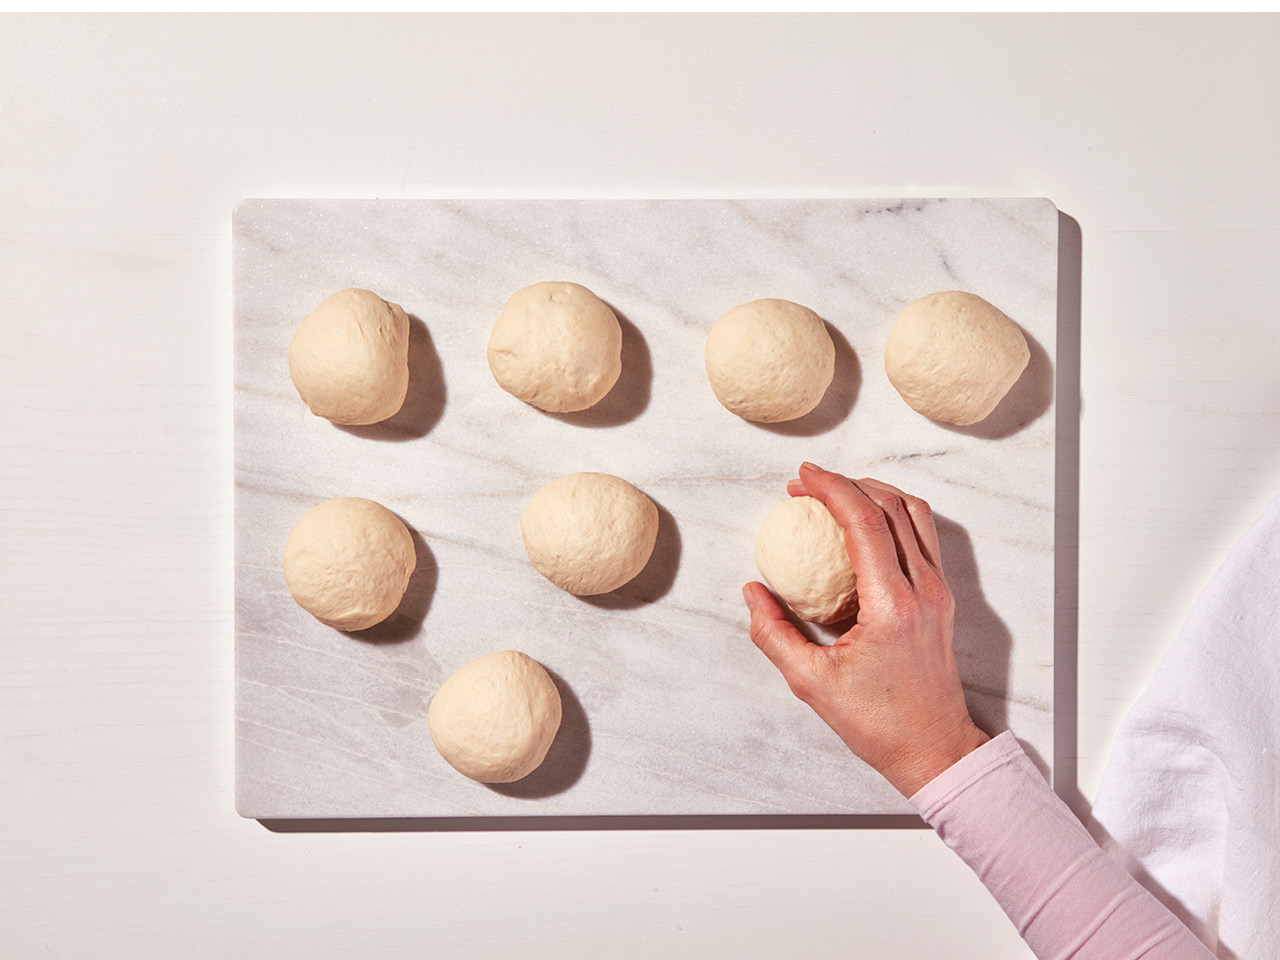 A person's hand placing dough balls on a cutting board, the first step of making homemade bagels.